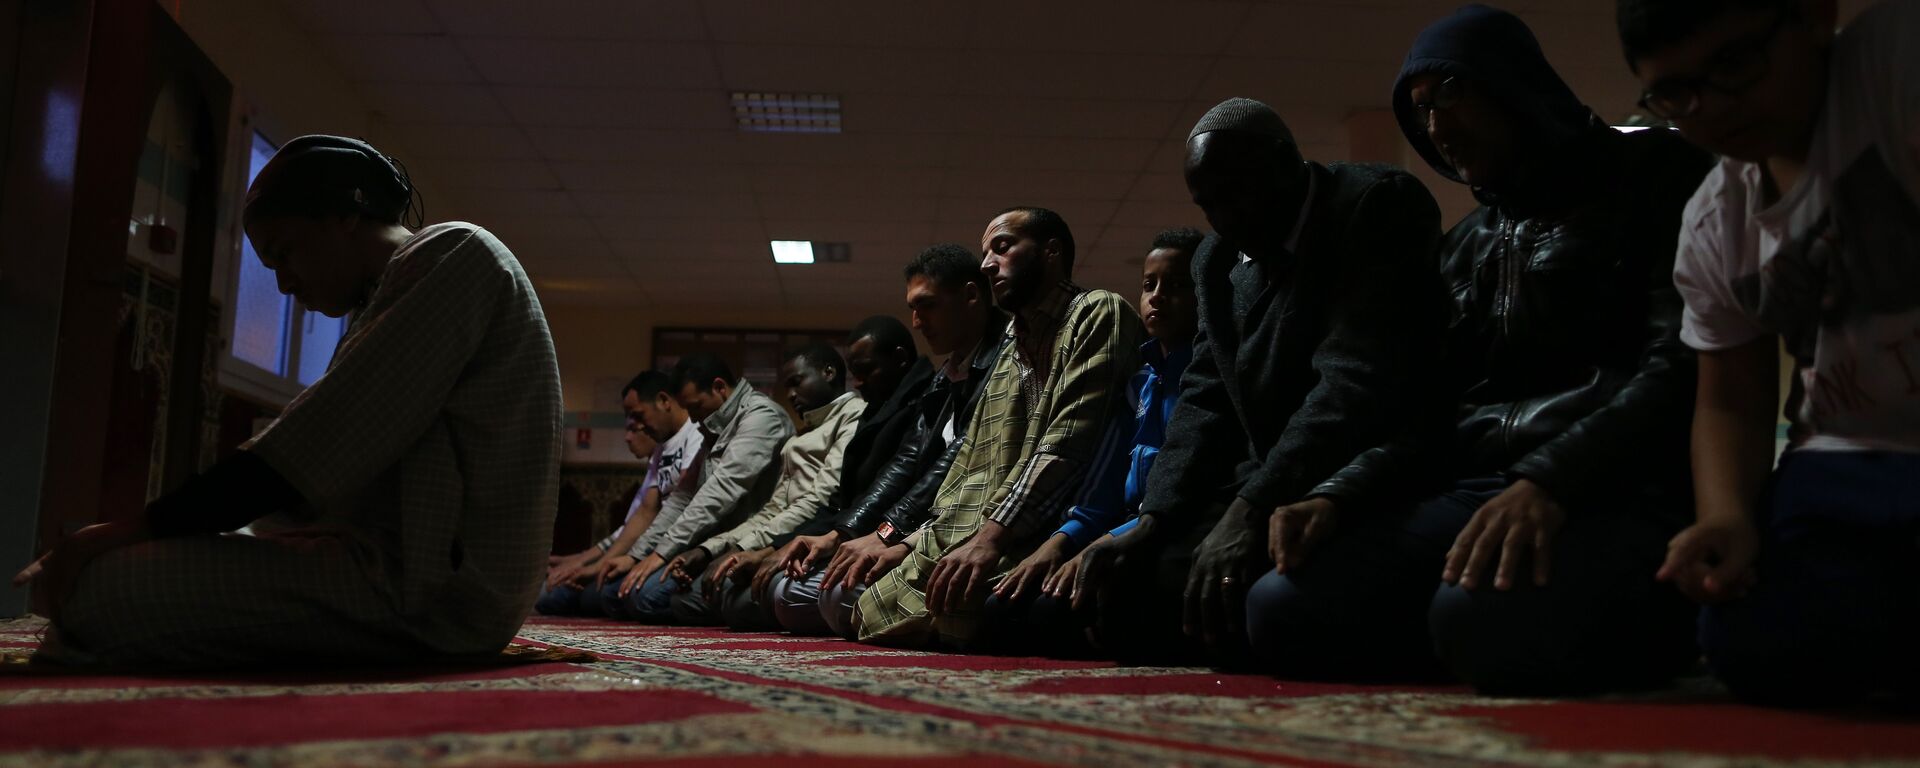 Muslims pray during the Muslim festivities of Eid al-Adha at the mosque in Cherbourg-Octeville, northwestern France on September 24, 2015. - Sputnik Afrique, 1920, 28.12.2020